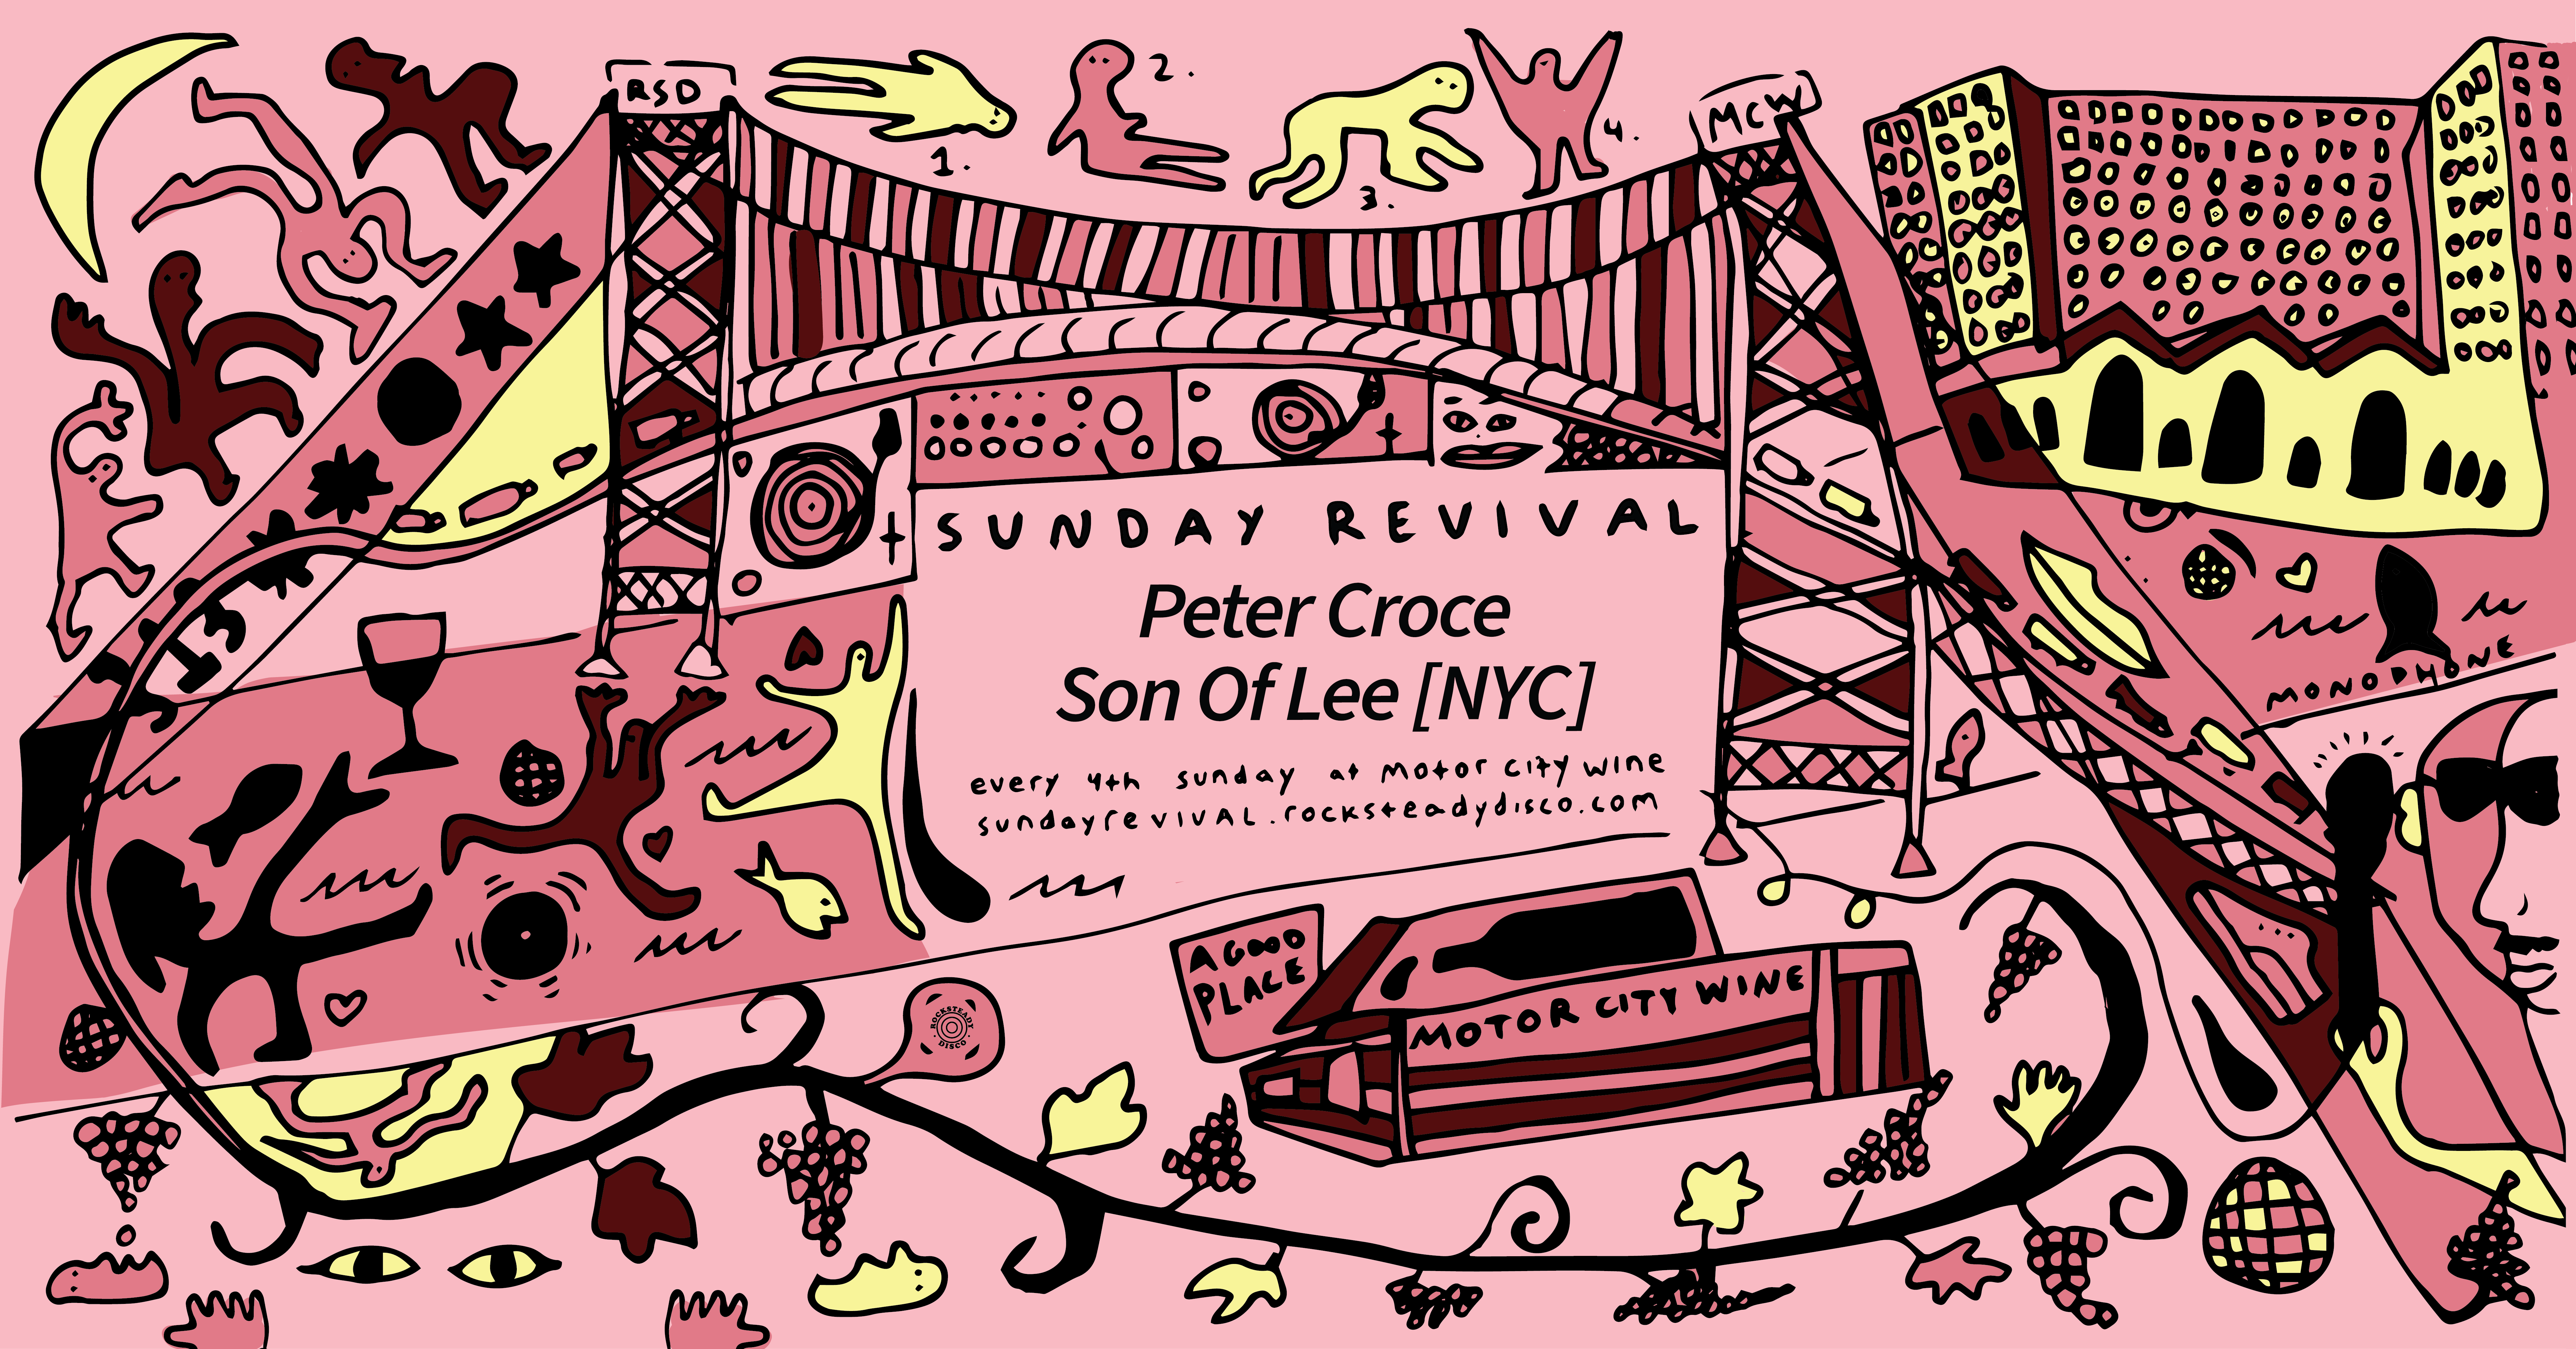 Sunday Revival w Son Of Lee [NYC] & Peter Croce - フライヤー表